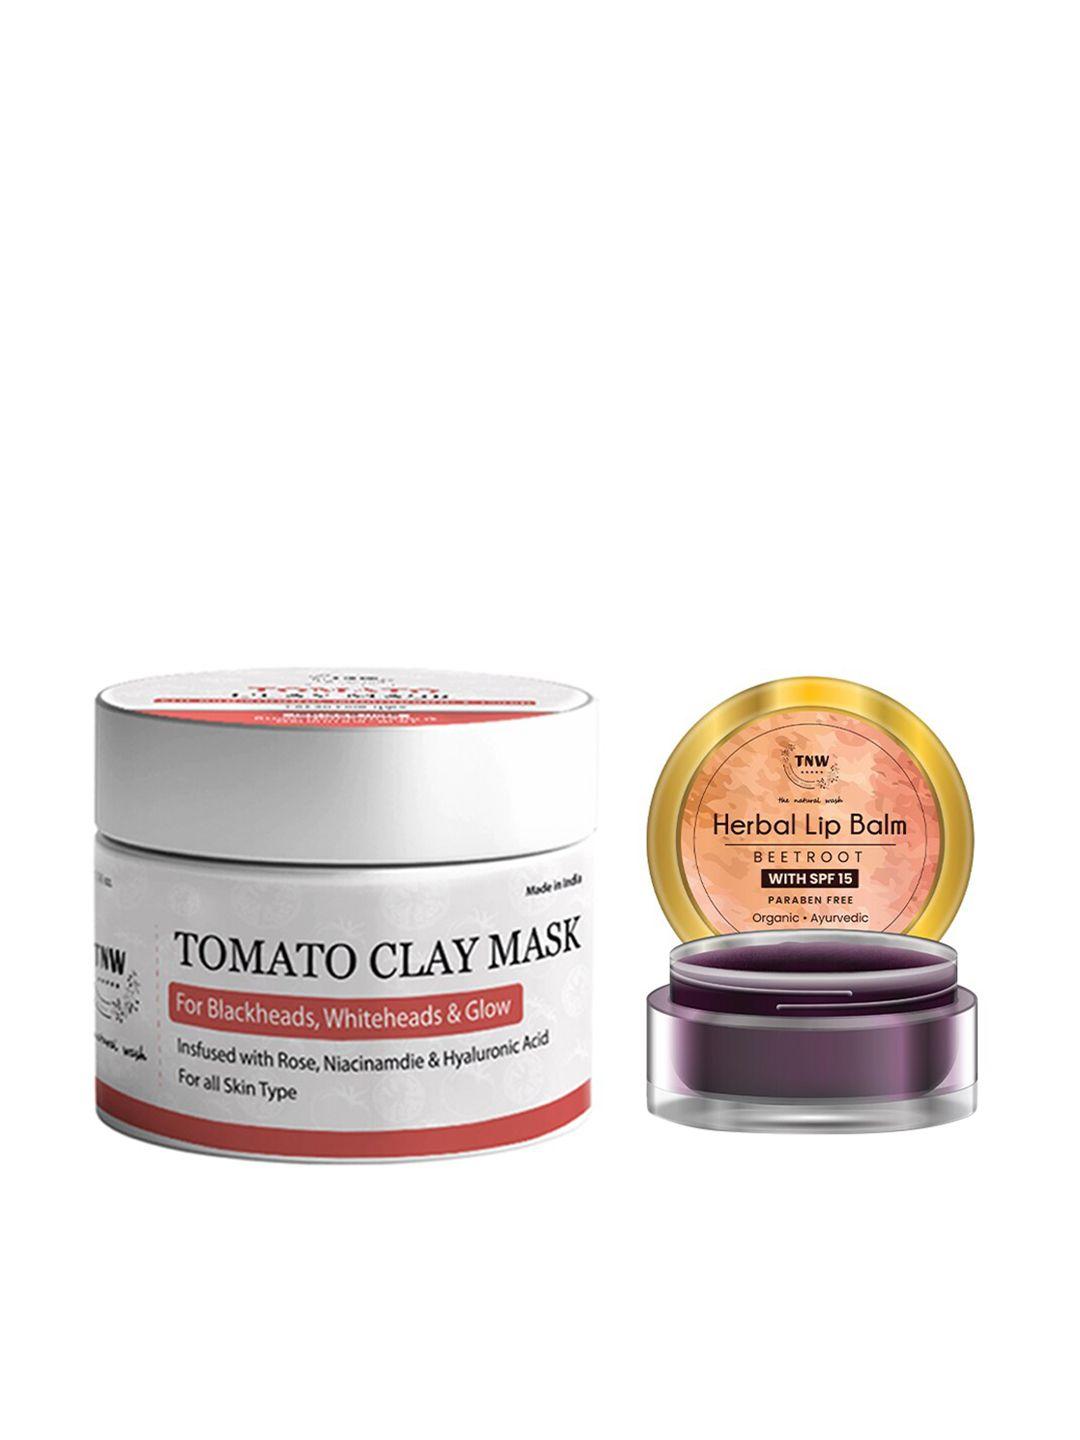 tnw the natural wash set of tomato clay mask & beetroot spf 15 herbal lip balm